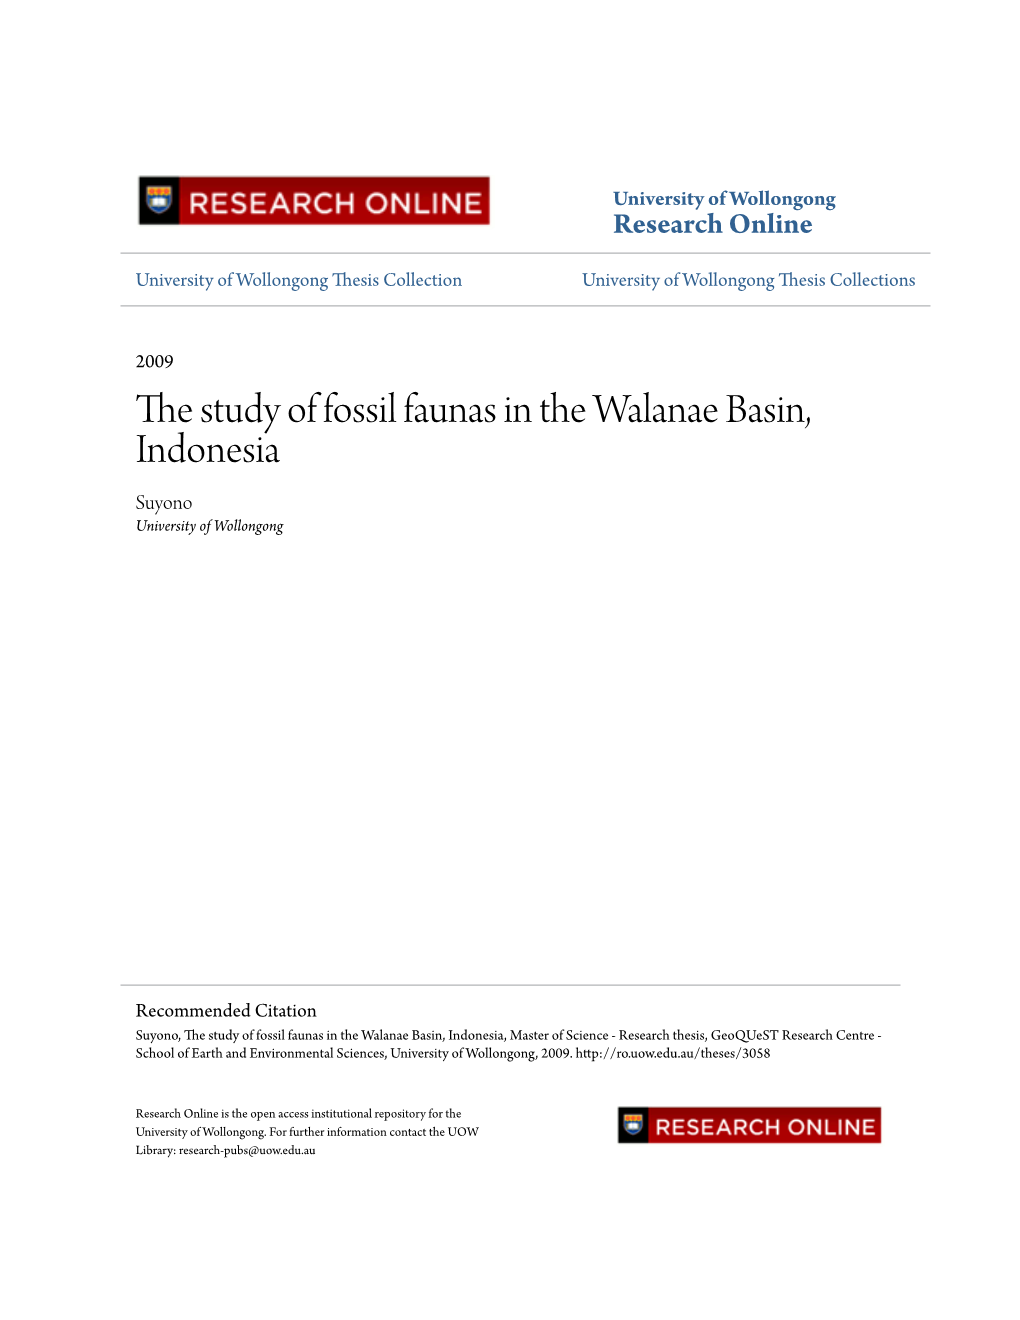 The Study of Fossil Faunas in the Walanae Basin, Indonesia